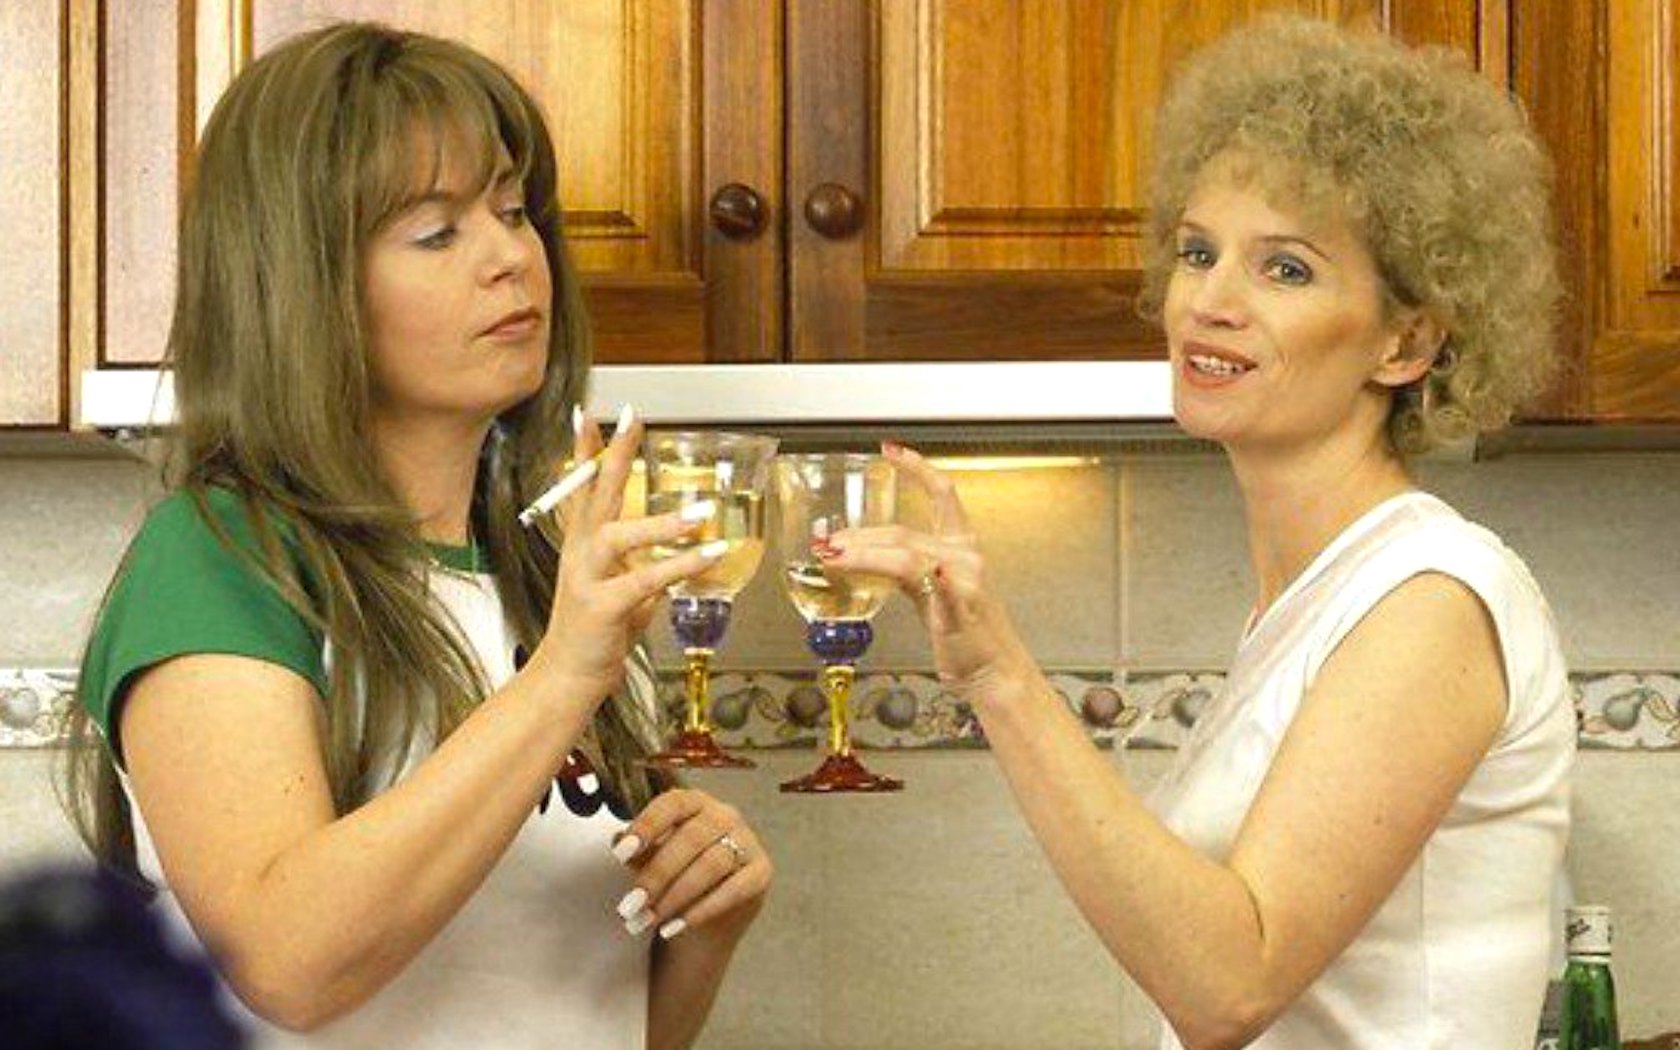 Buttered: Aussie Chard Fest Is A Kath & Kim Inspired Chardonnay Festival